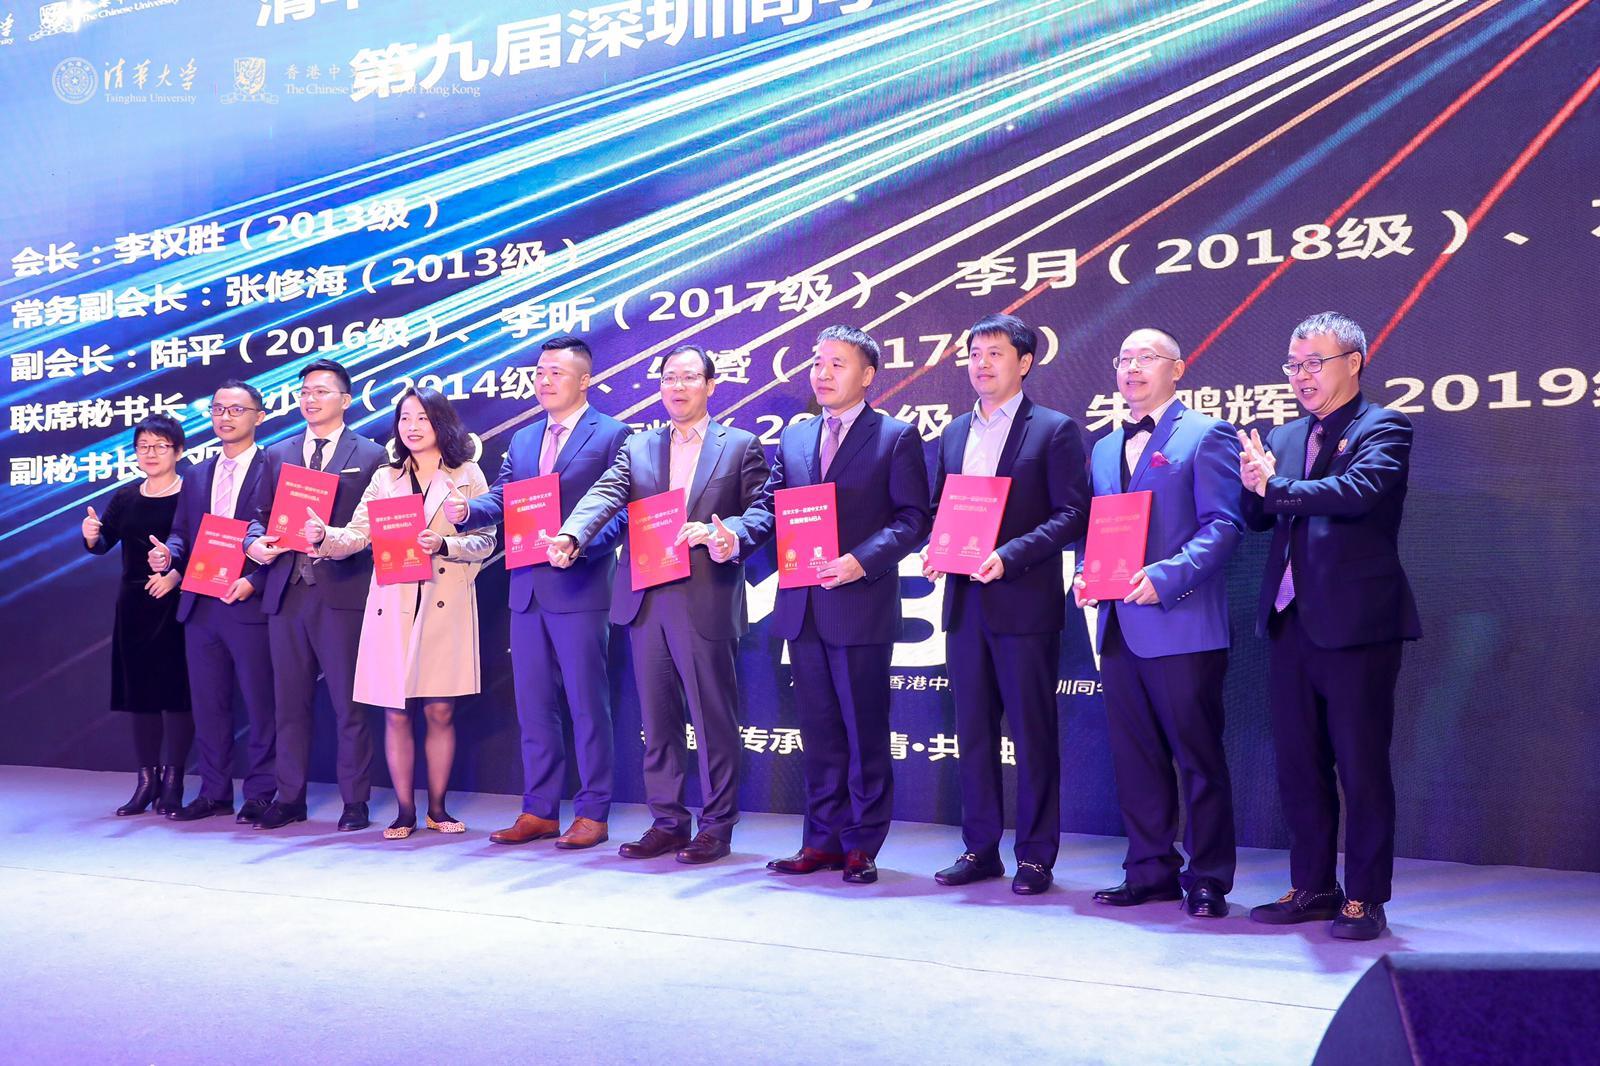 Quansheng Li (sixth from left) joined the official inauguration ceremony with other committee members